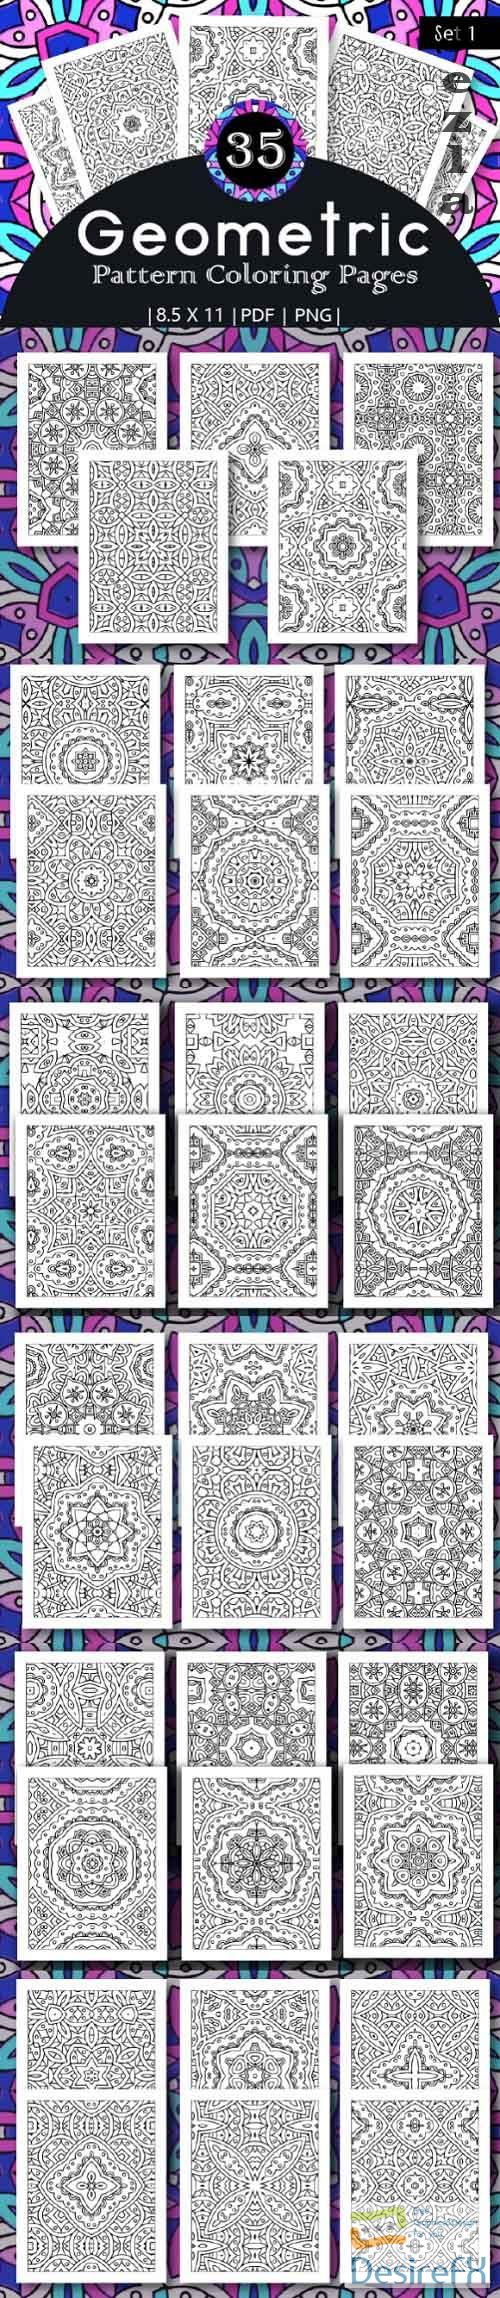 35 Geometric Pattern Coloring Pages